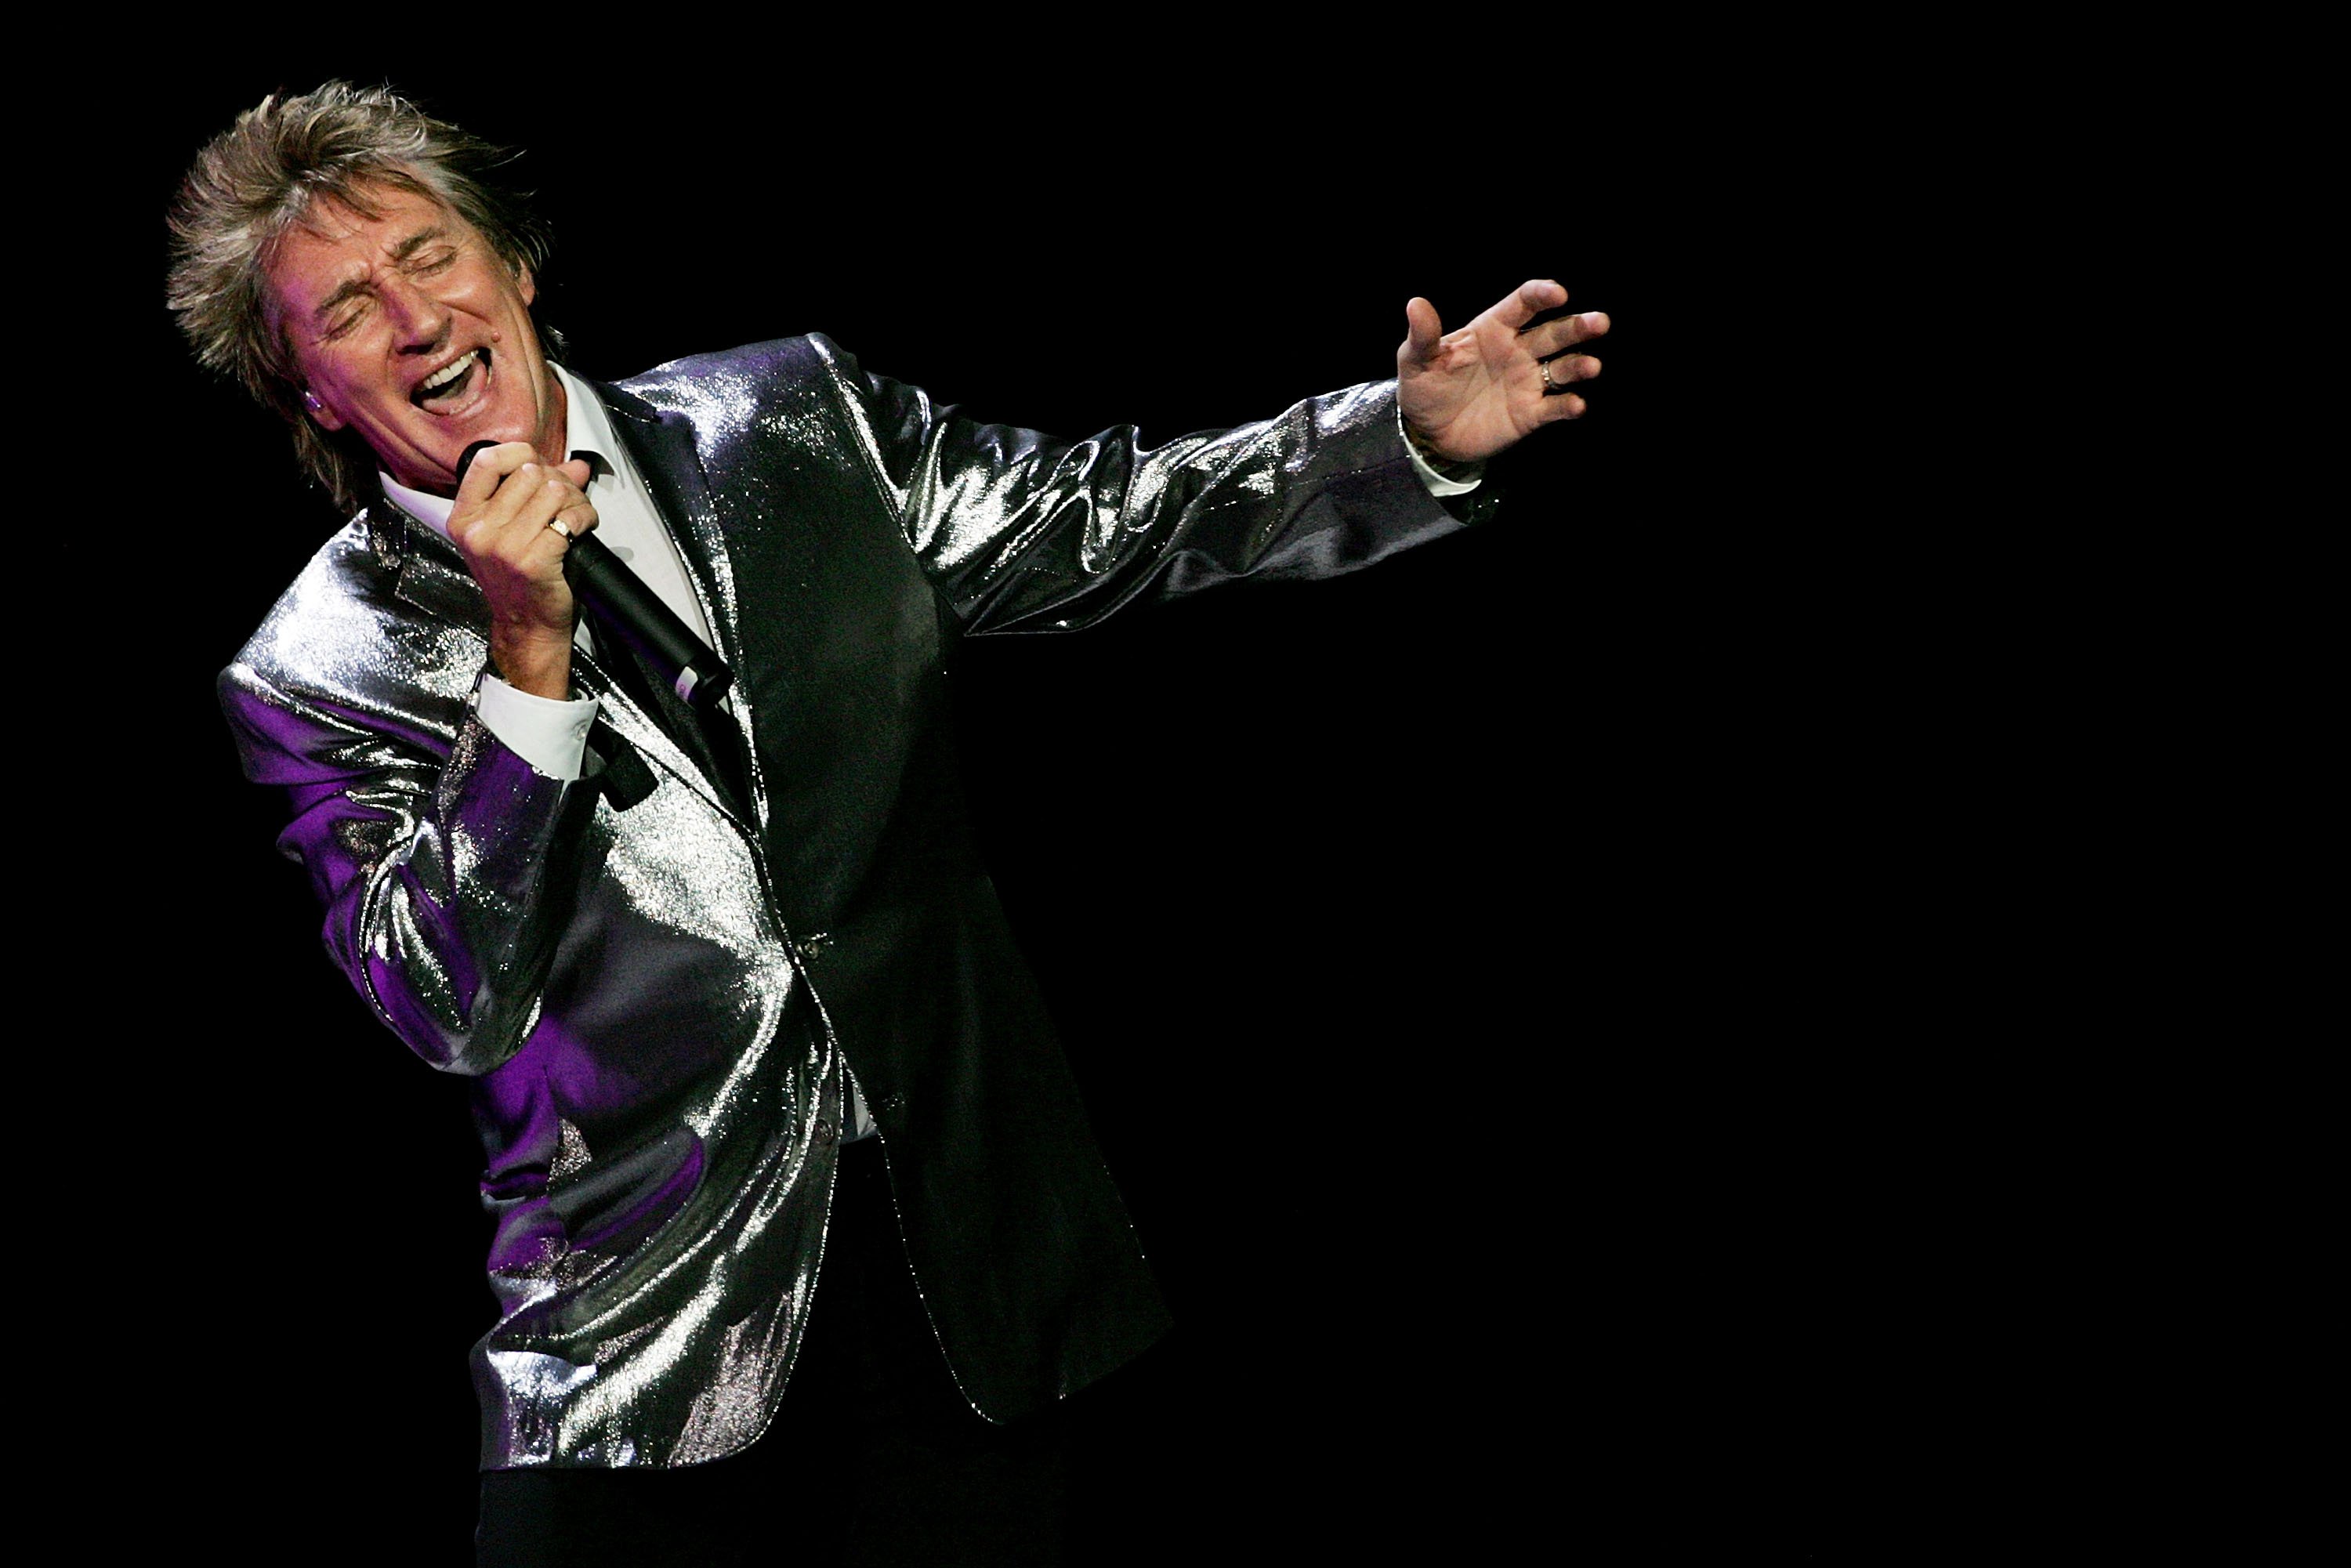 Rod Stewart performs on stage at the Acer Arena on February 26, 2008, in Sydney, Australia | Source: Getty Images